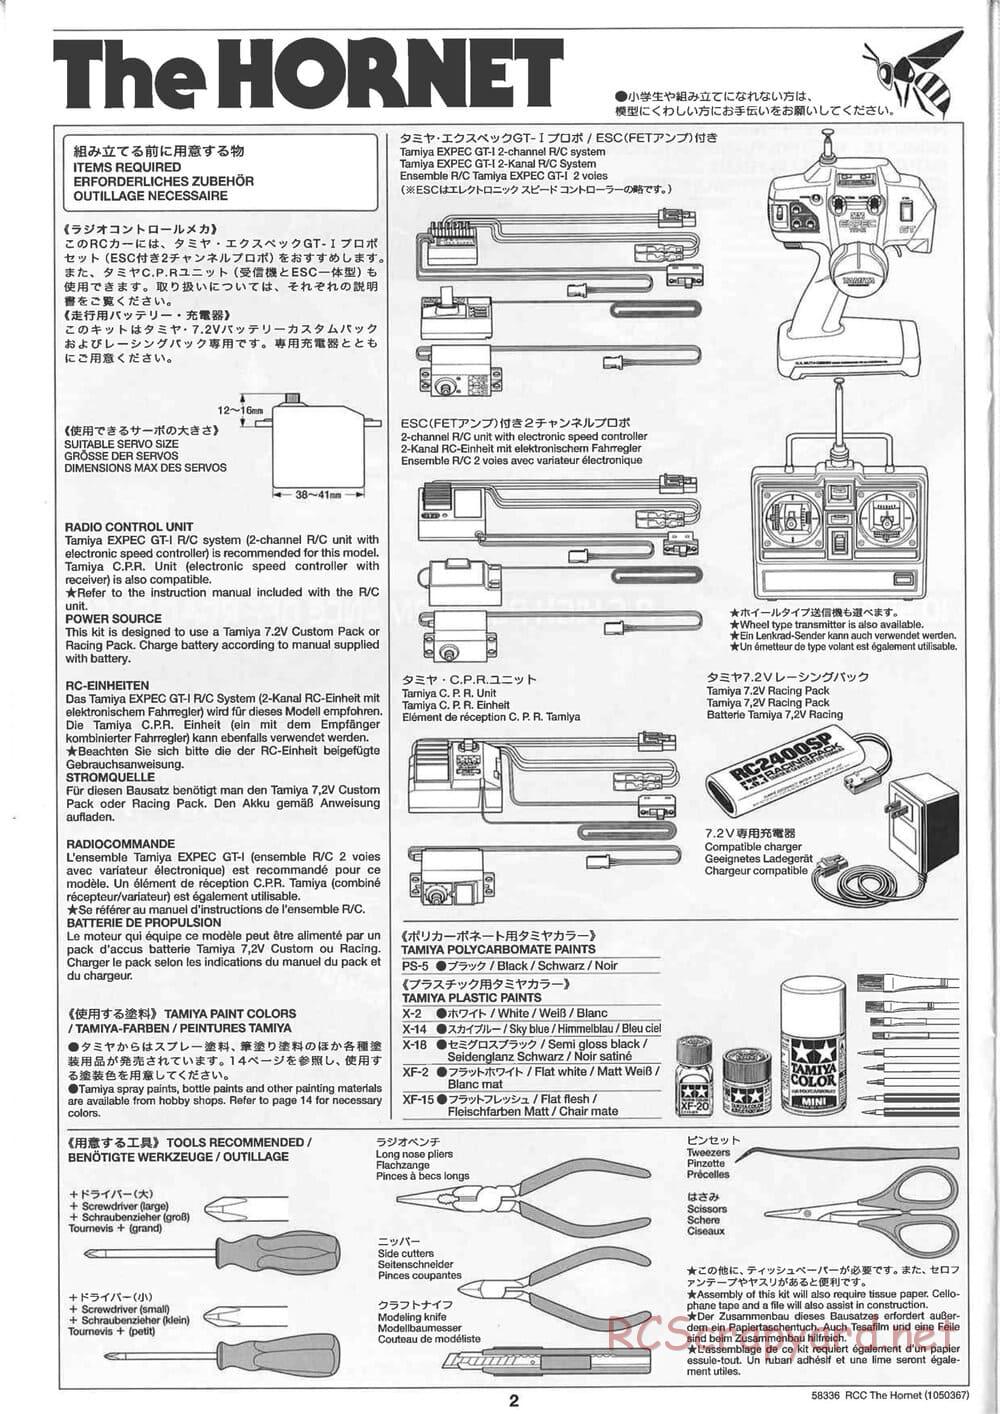 Tamiya - The Hornet (2004) - GH Chassis - Manual - Page 2